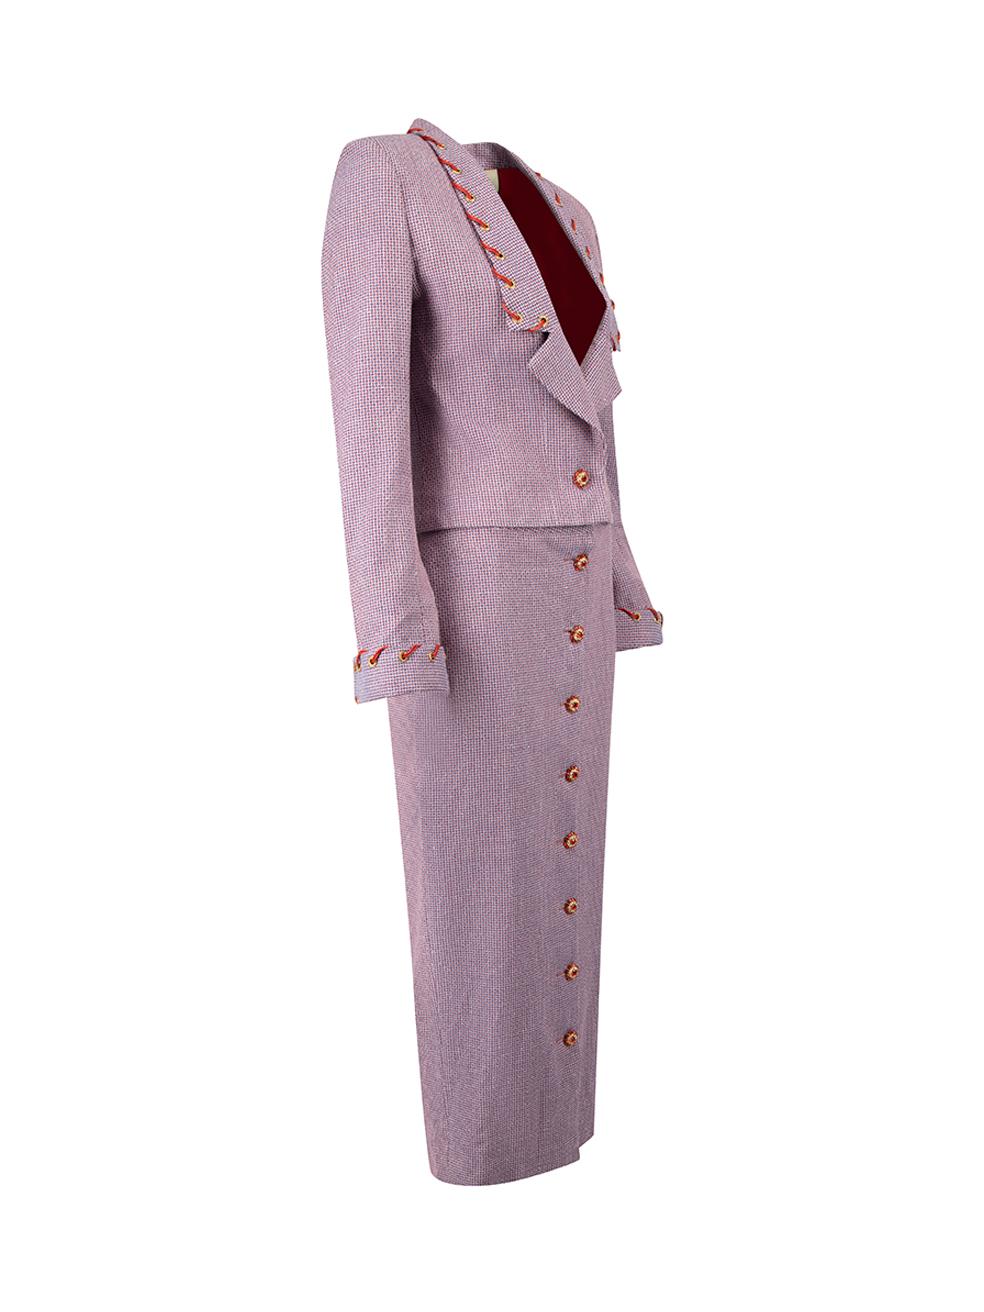 CONDITION is Very good. Hardly any visible wear to set is evident on this used Sanne designer sample item. 
 
 Details
  Designer sample item
 Purple
 Wool
 Skirt suit set
 Weave pattern
 Cropped blazer
 Single breasted with gemstone button
 Red